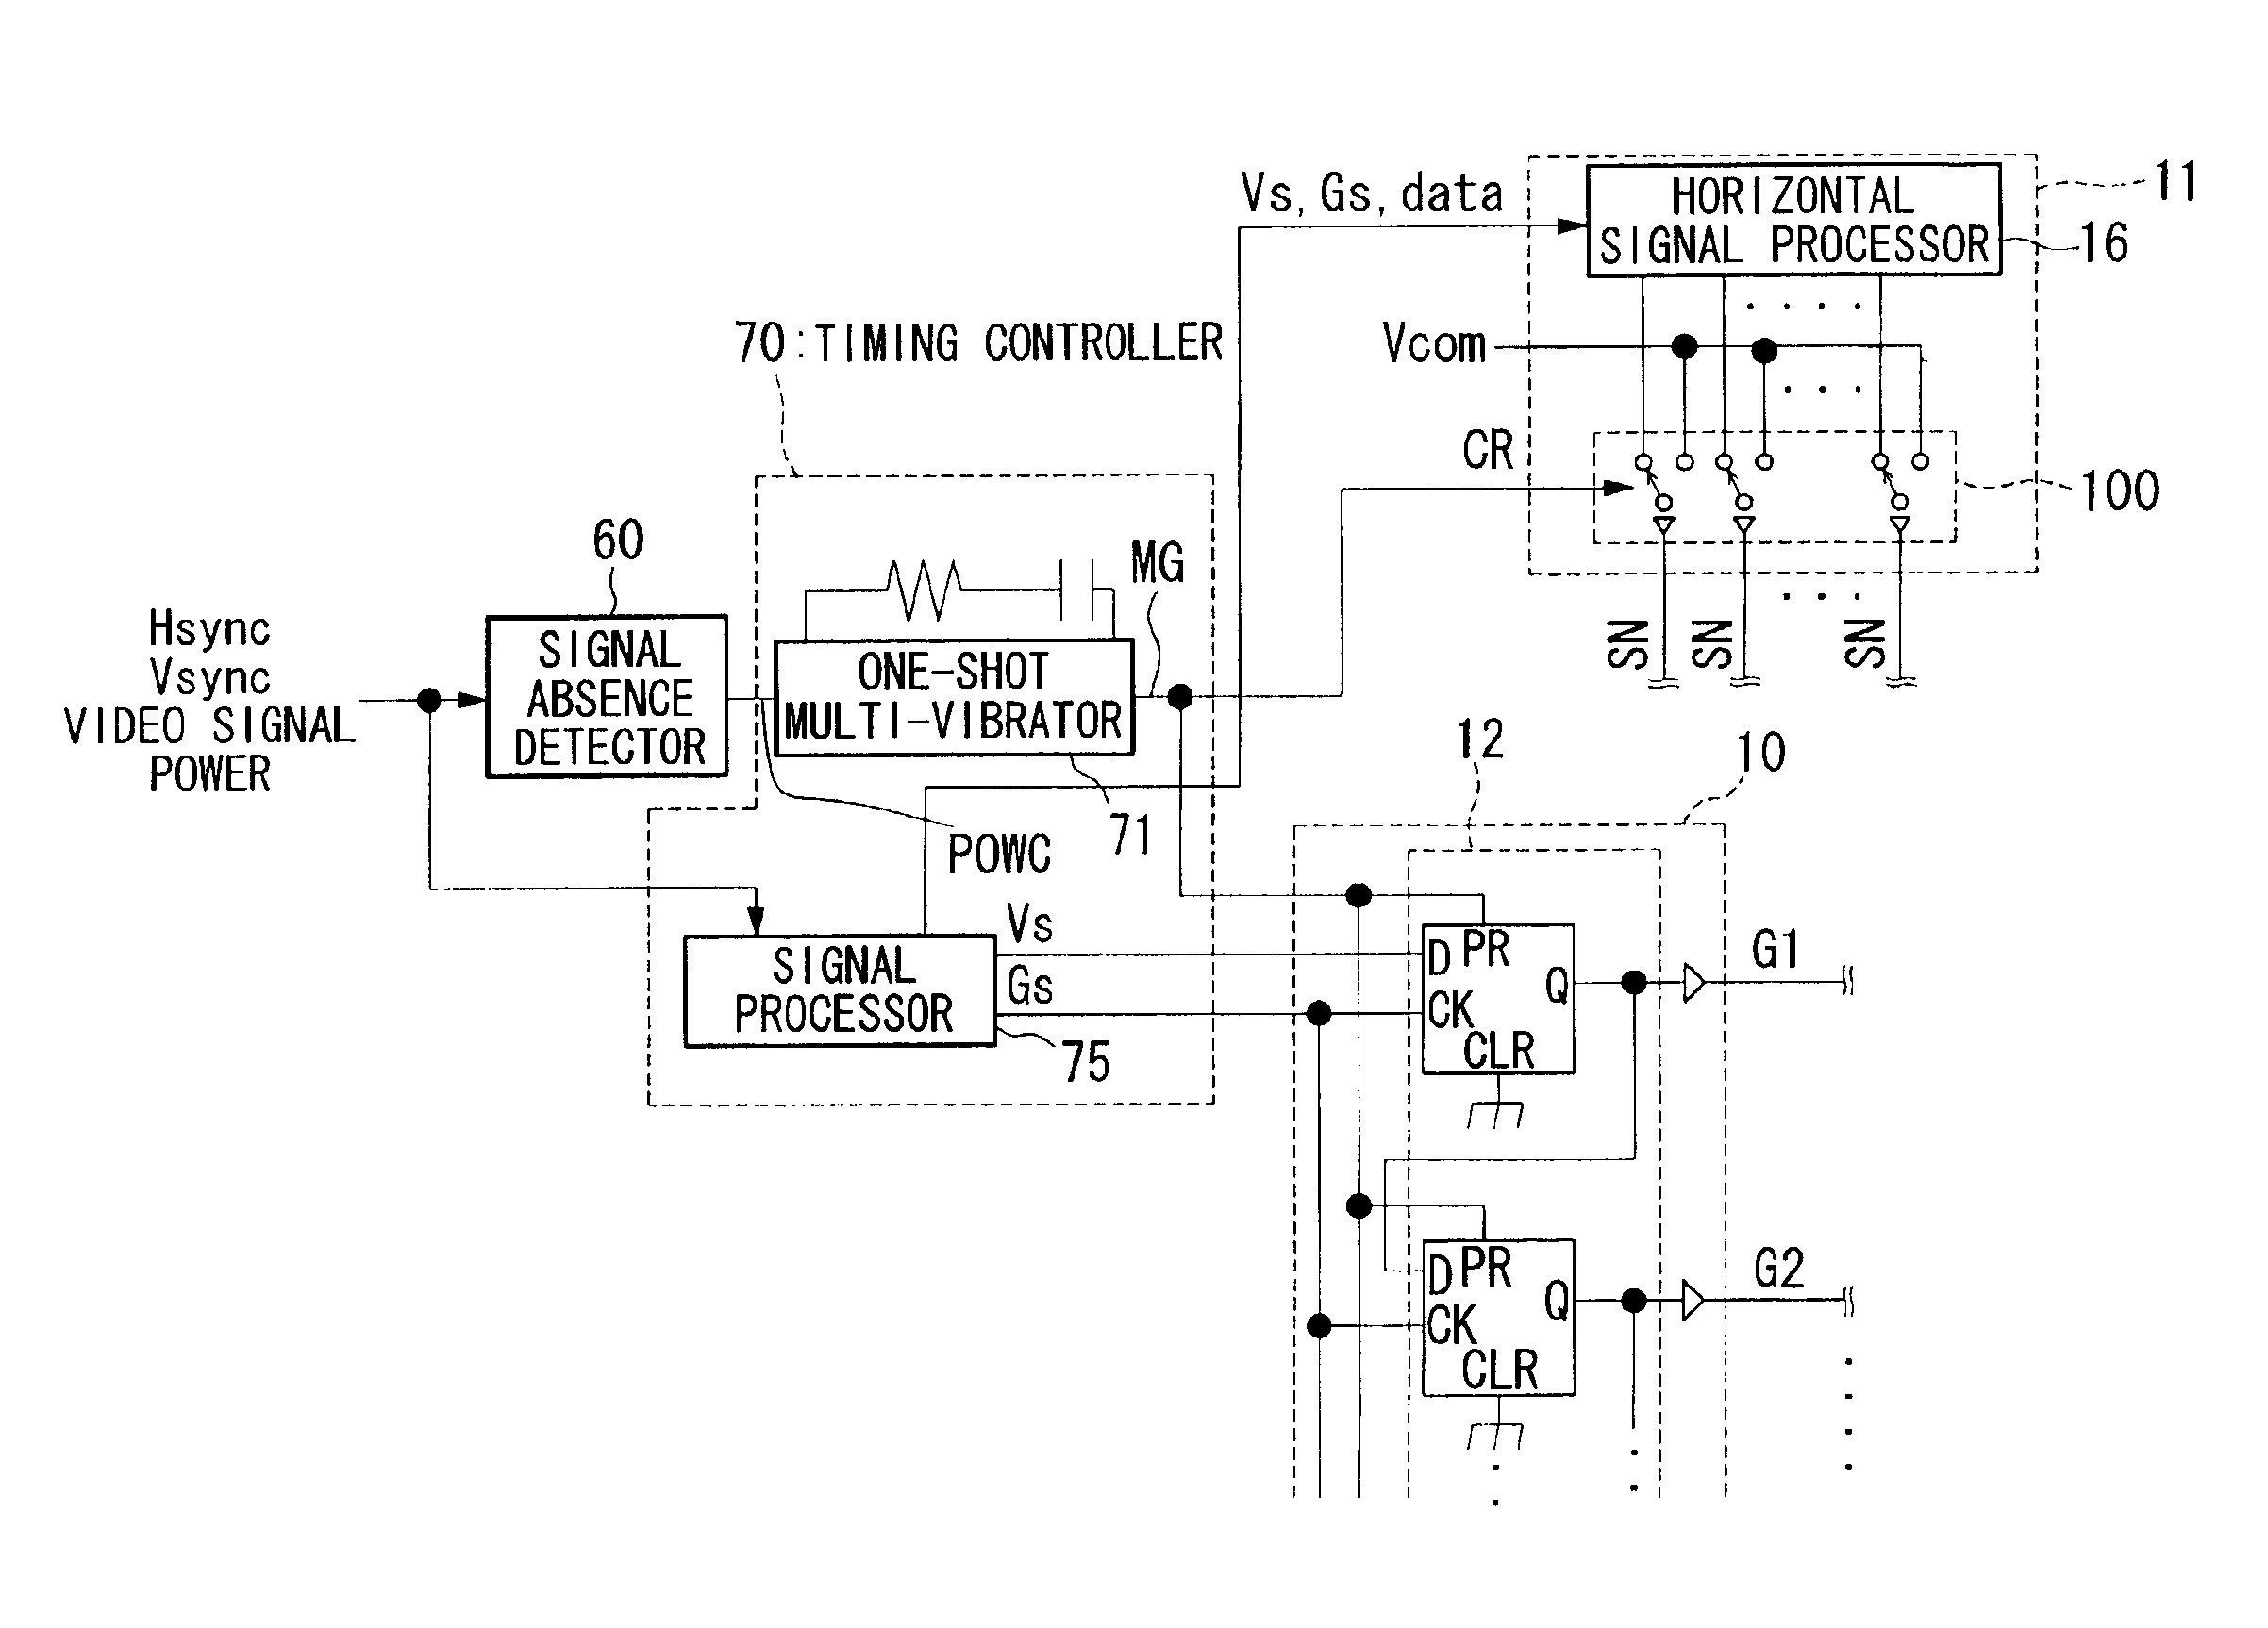 Liquid crystal display device for preventing and afterimage